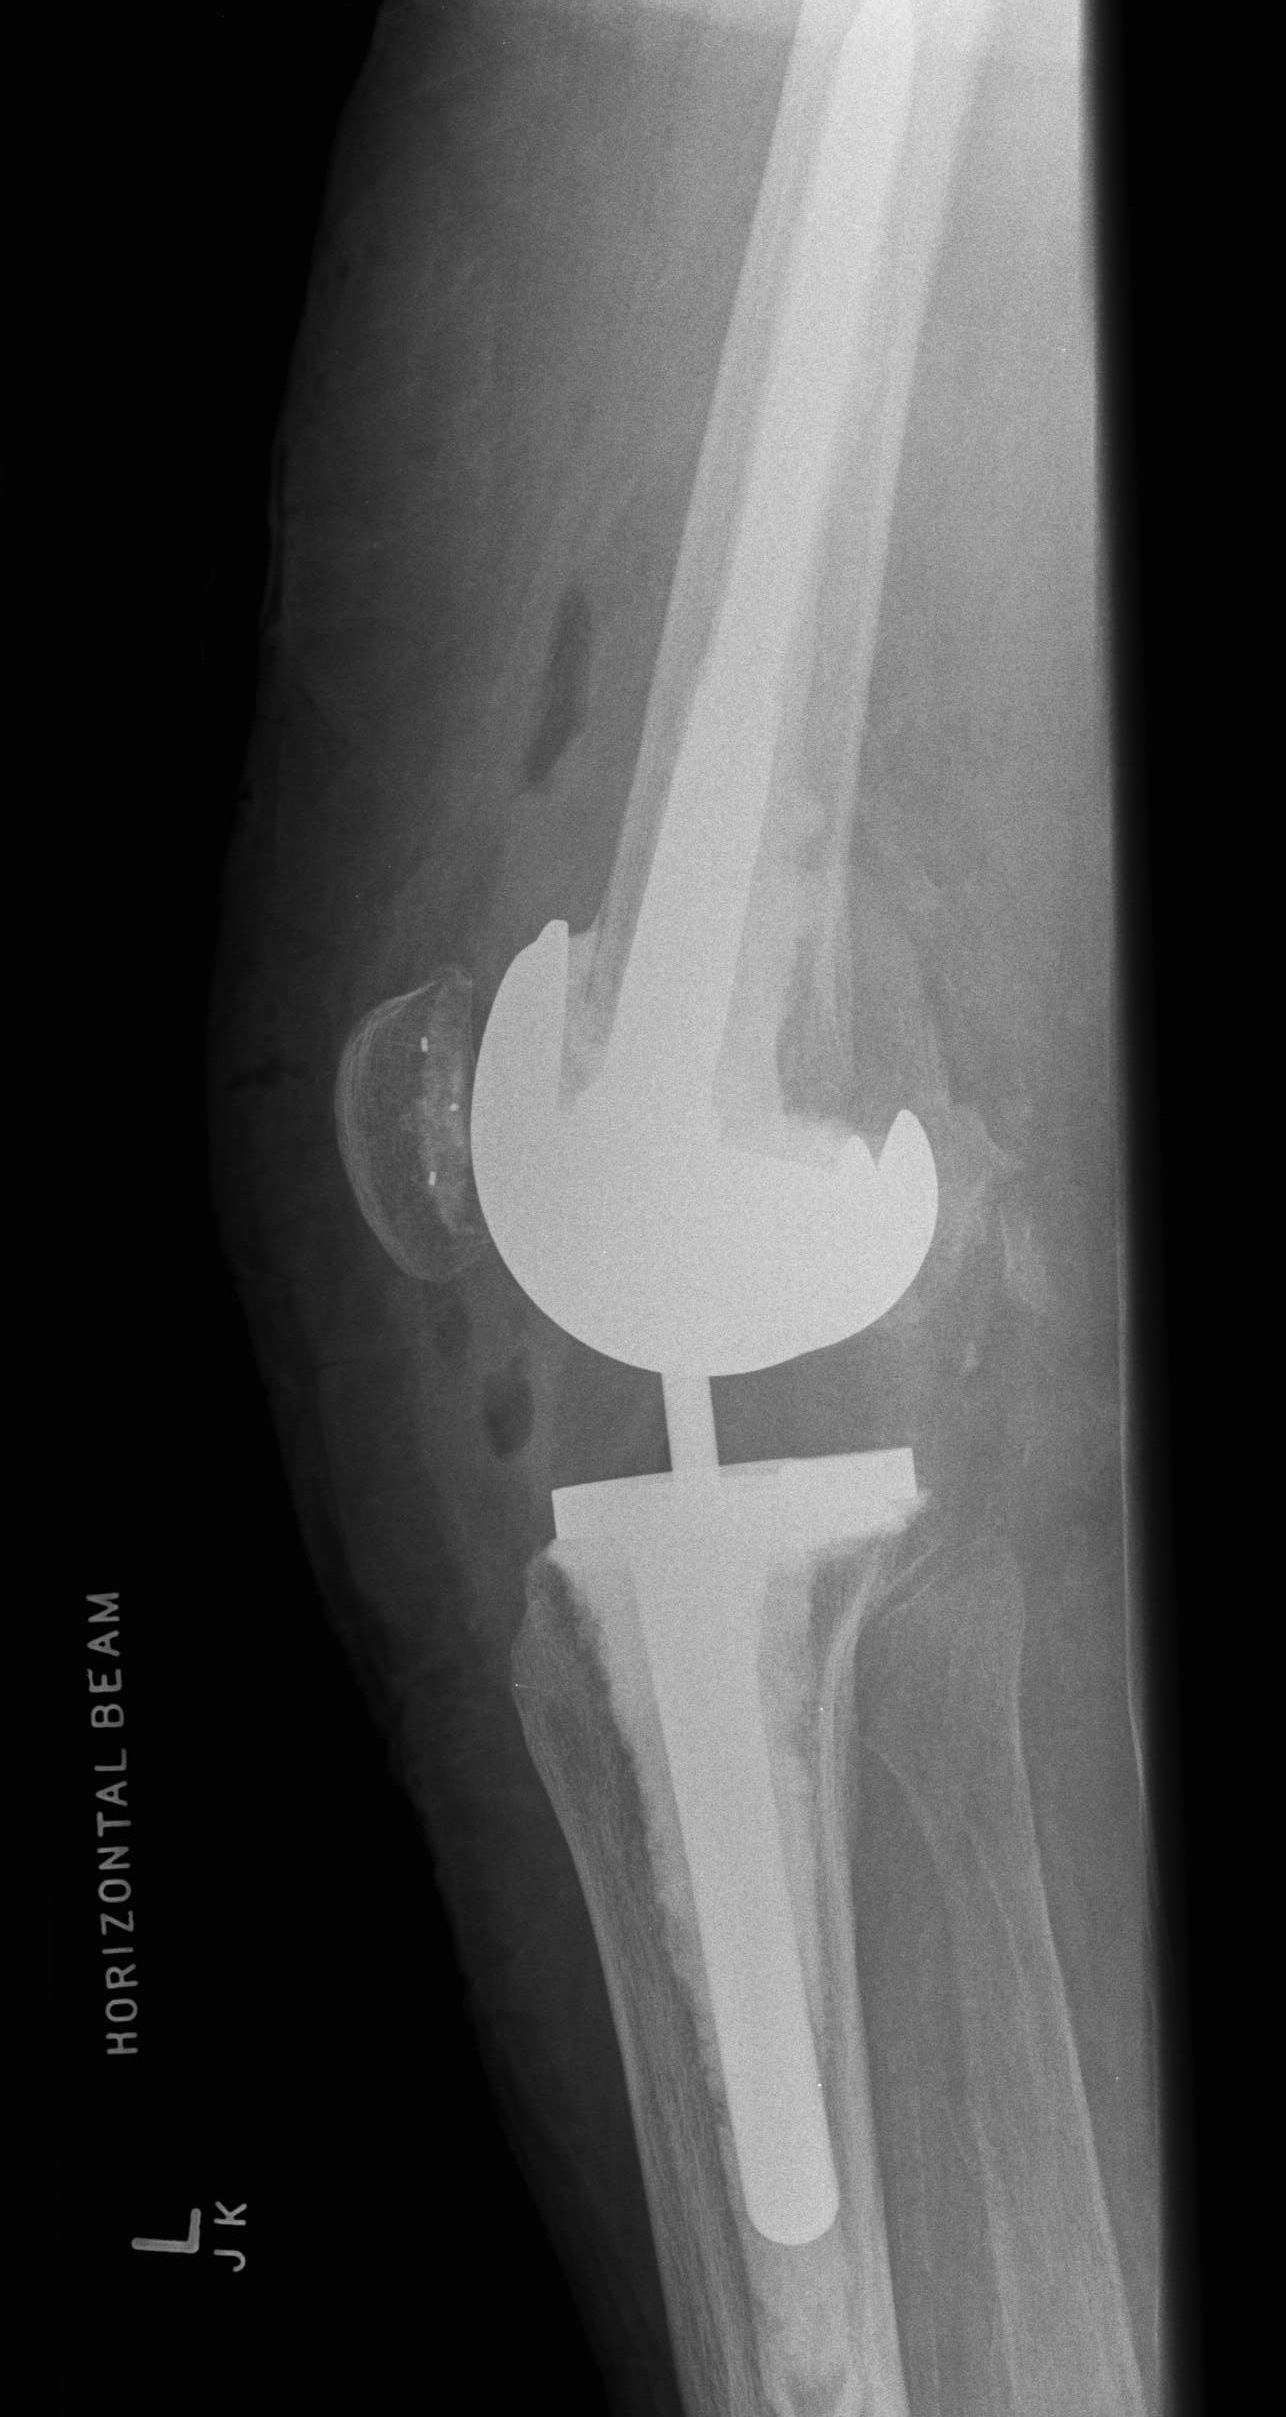 TKR Periprosthetic Fracture Revision Lateral